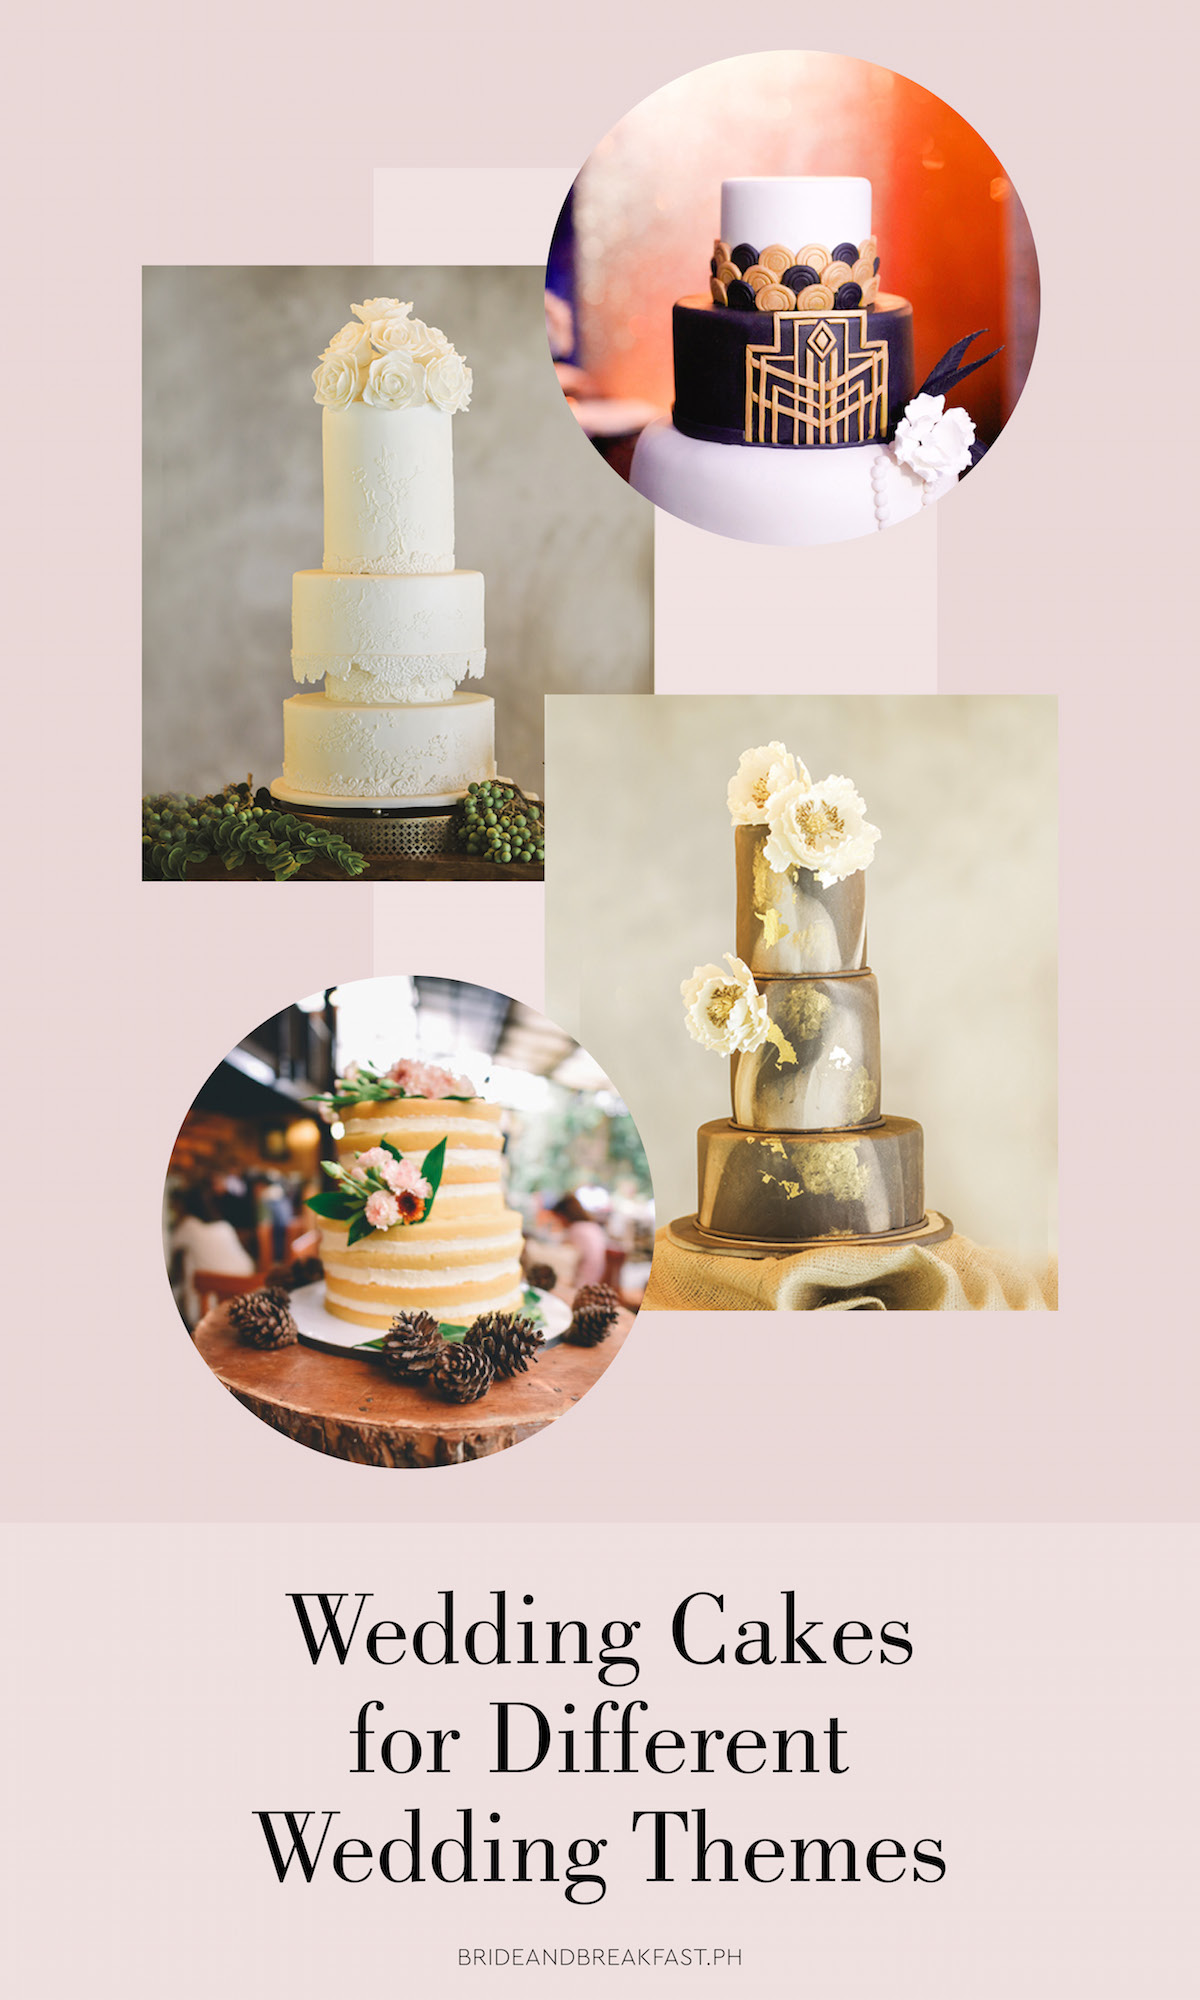 Wedding Cakes for Different Wedding Themes